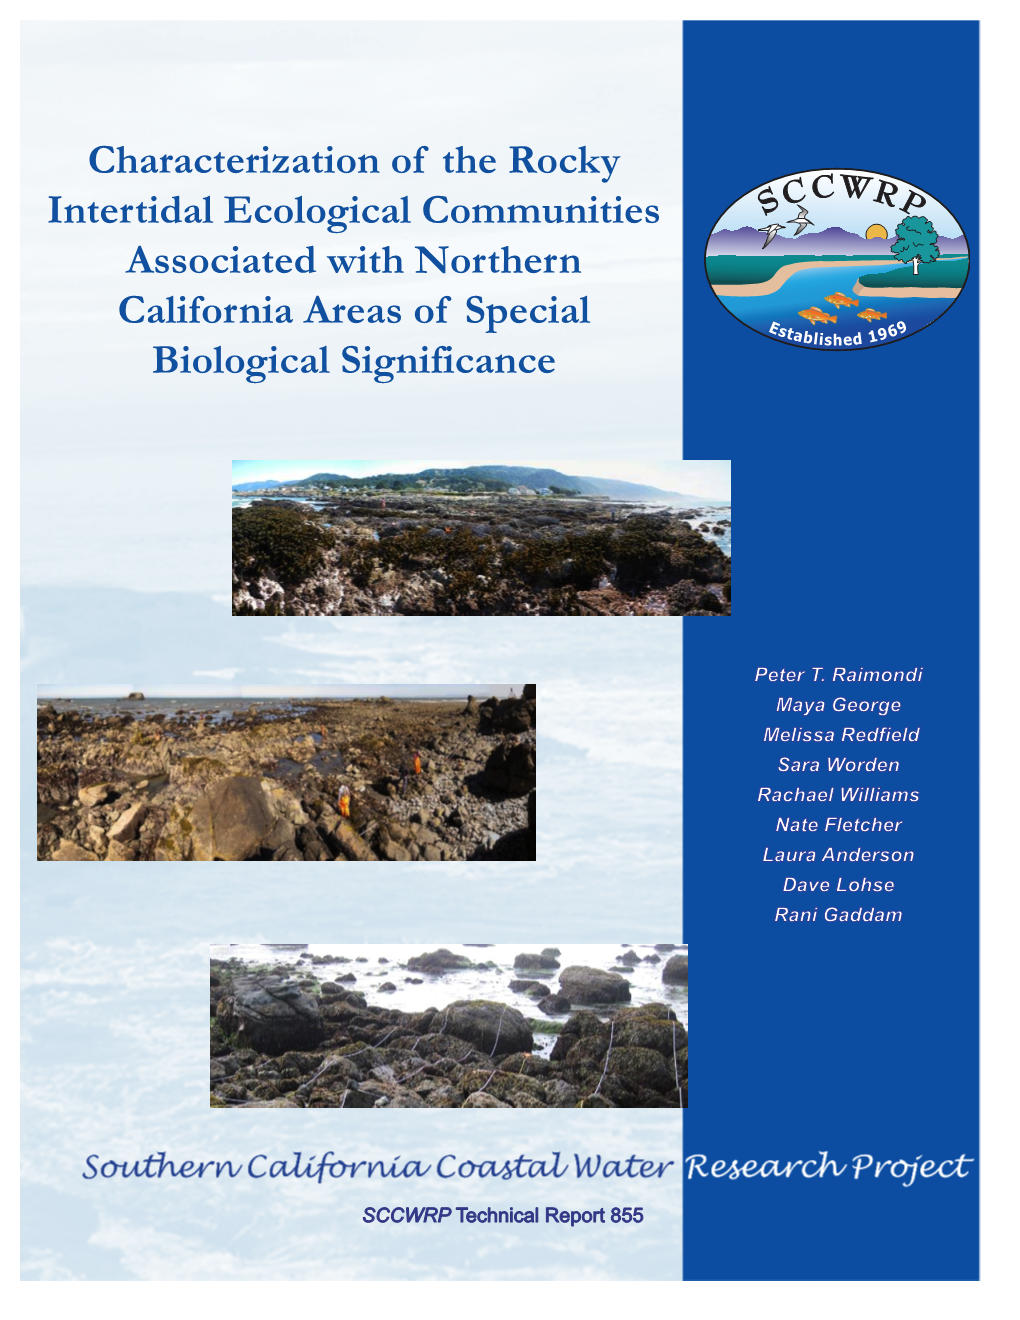 Characterization of the Rocky Intertidal Ecological Communities Associated with Northern California Areas of Special Biological Significance